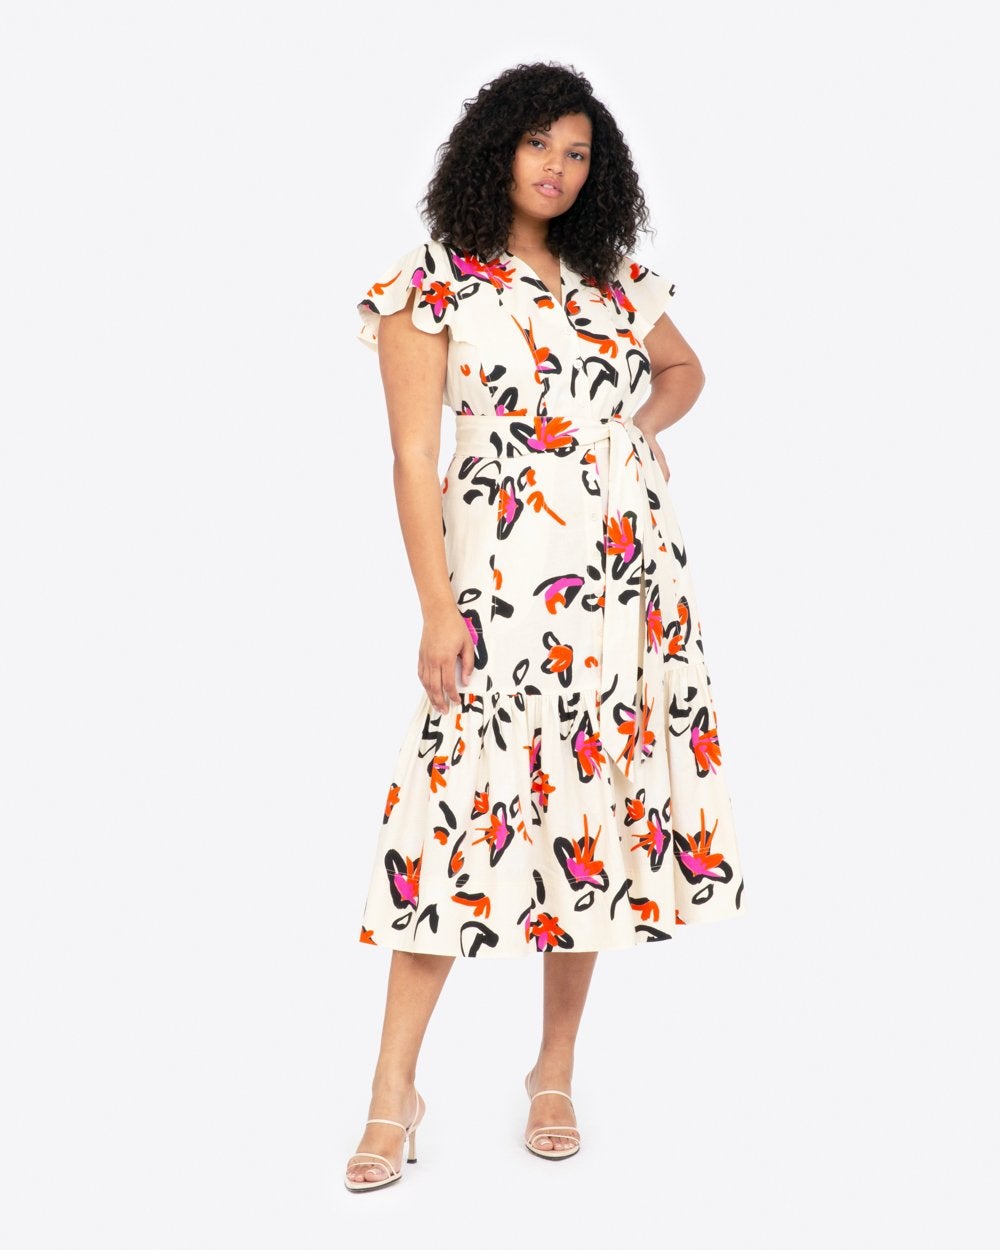 Plus-Size Loose House Dresses For ...